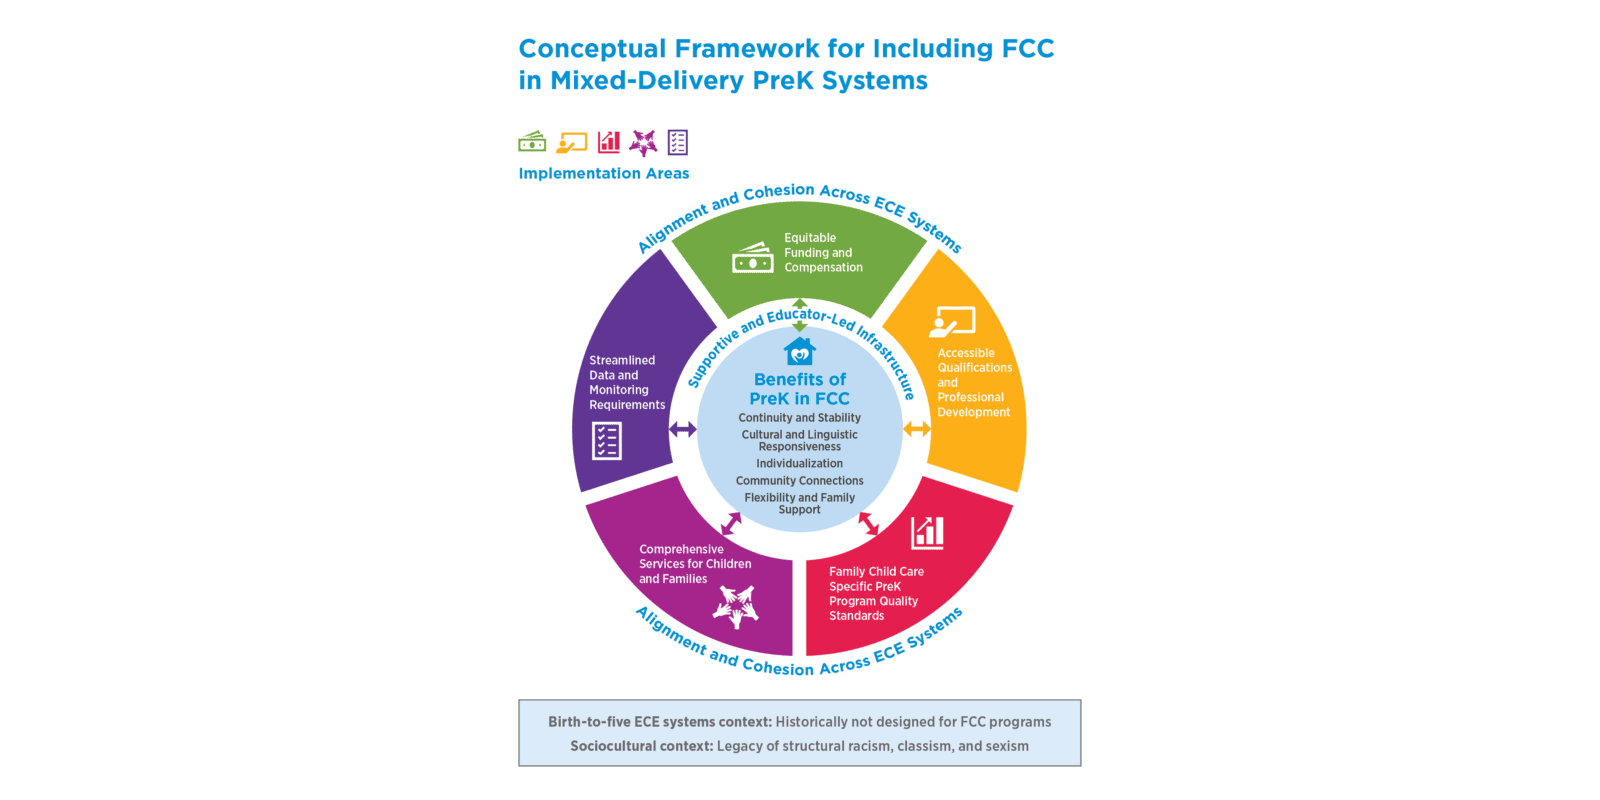 Figure showing the Conceptual Framework for Including Family Child Care (FCC) in Mixed-Delivery PreK Systems. The Birth-to-five ECE systems context is that they are historically not designed for FCC programs. The Sociocultural context is that there is a legacy of structural racism, classism, and sexism. The figure shows that the benefits of PreK in FCC include continuity and stability, cultural and linguistic responsiveness, individualization, community connections, and flexibility and family support. With supportive and educator-led infrastructure in place across five implementation areas, alignment and cohesion across Early Childhood Education systems can be achieved. The five implementation areas are: Equitable funding and compensation, accessible qualifications and professional development, Family child care specific PreK Program quality standards, Comprehensive services for children and families, and streamlined data and monitoring requirements.